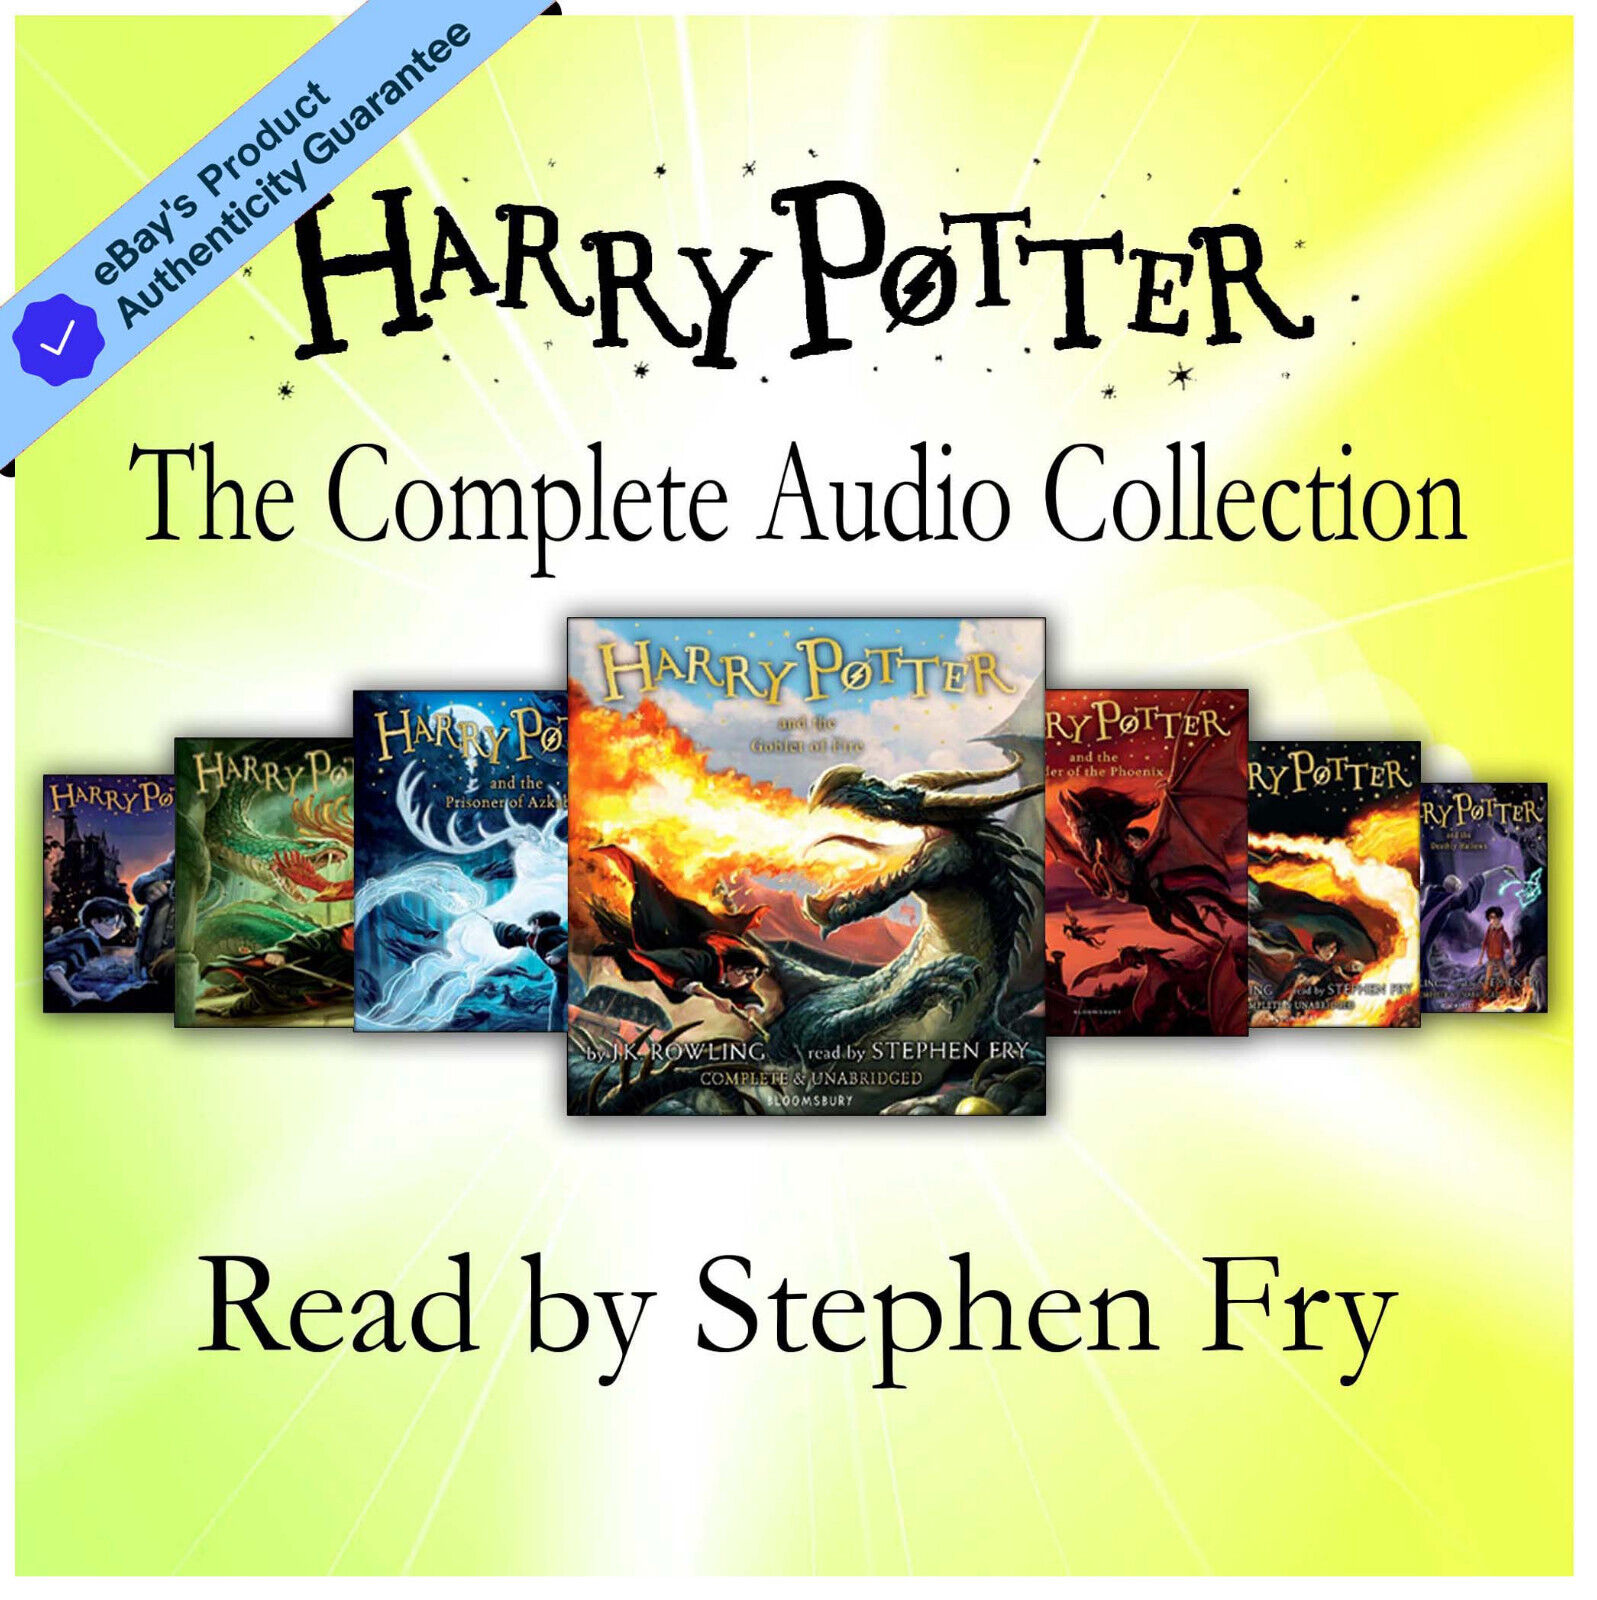 Your Complete Guide to the Harry Potter Audiobook Series 2